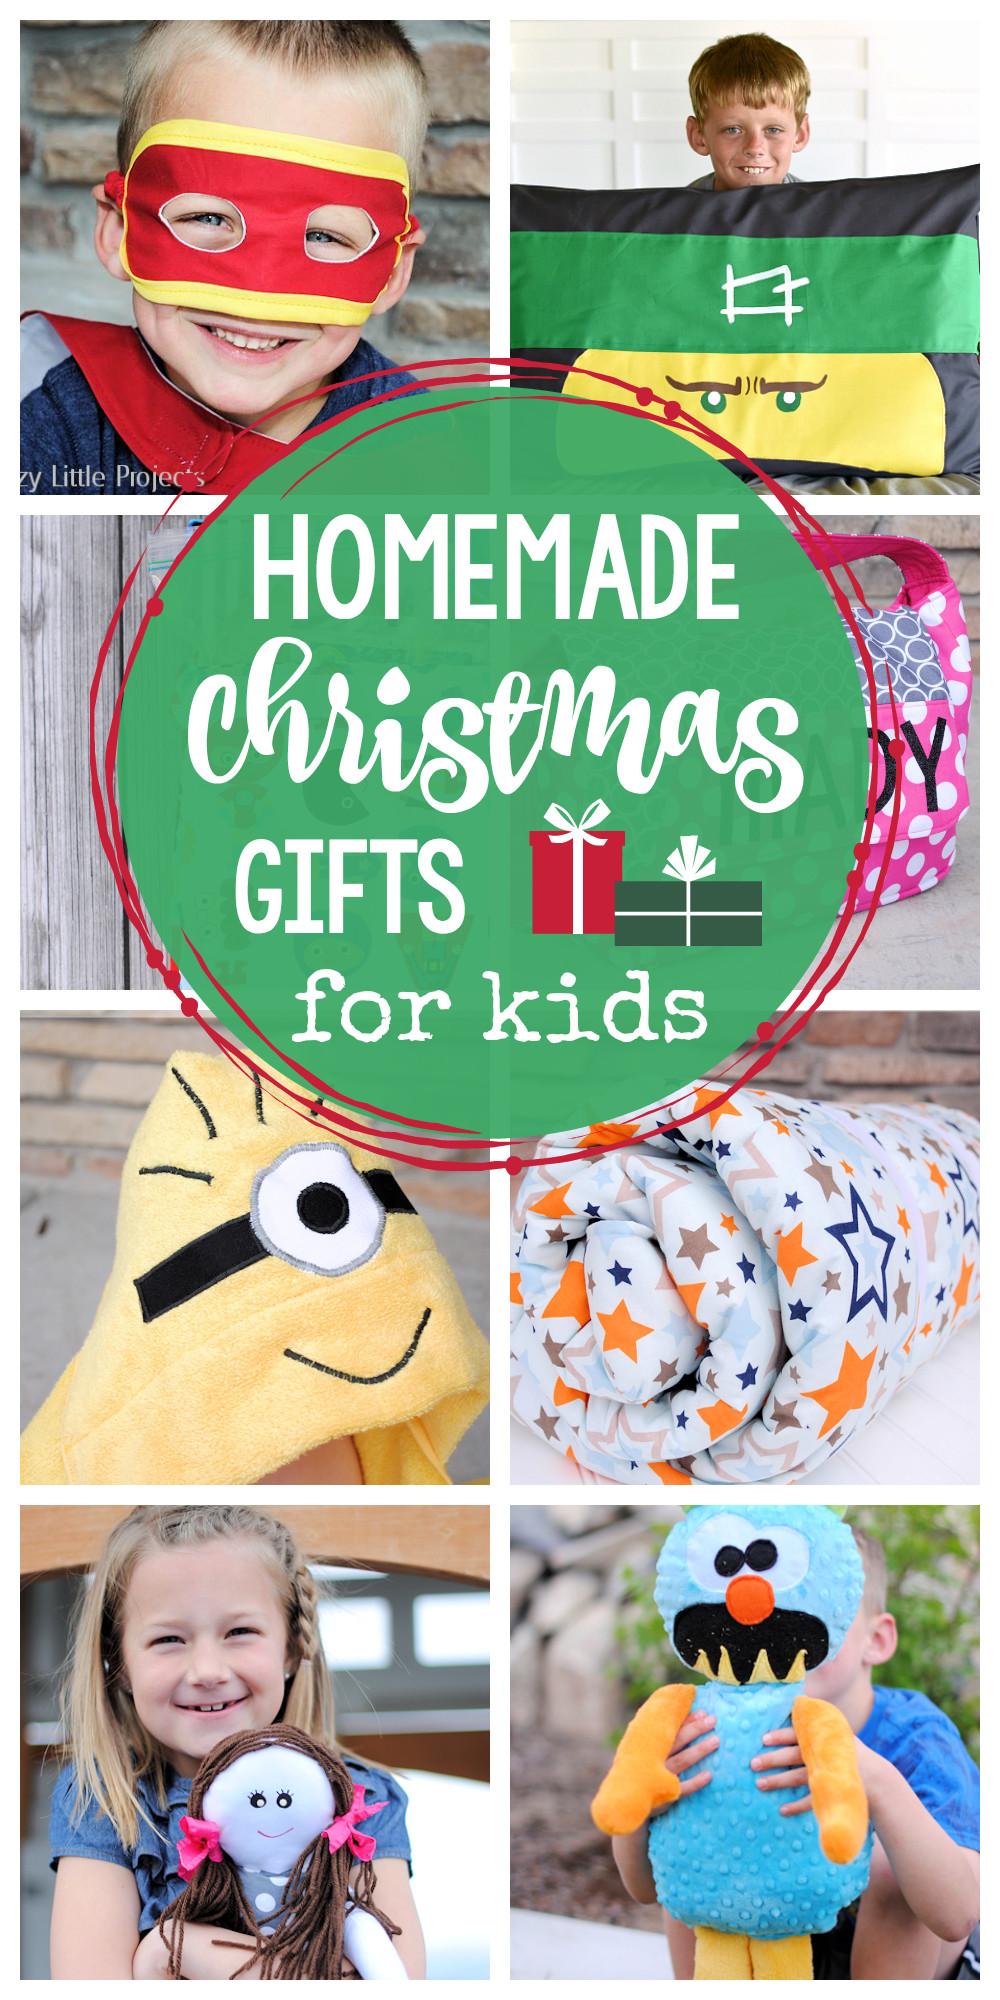 DIY Kids Christmas Gifts
 25 Homemade Christmas Gifts for Kids Crazy Little Projects